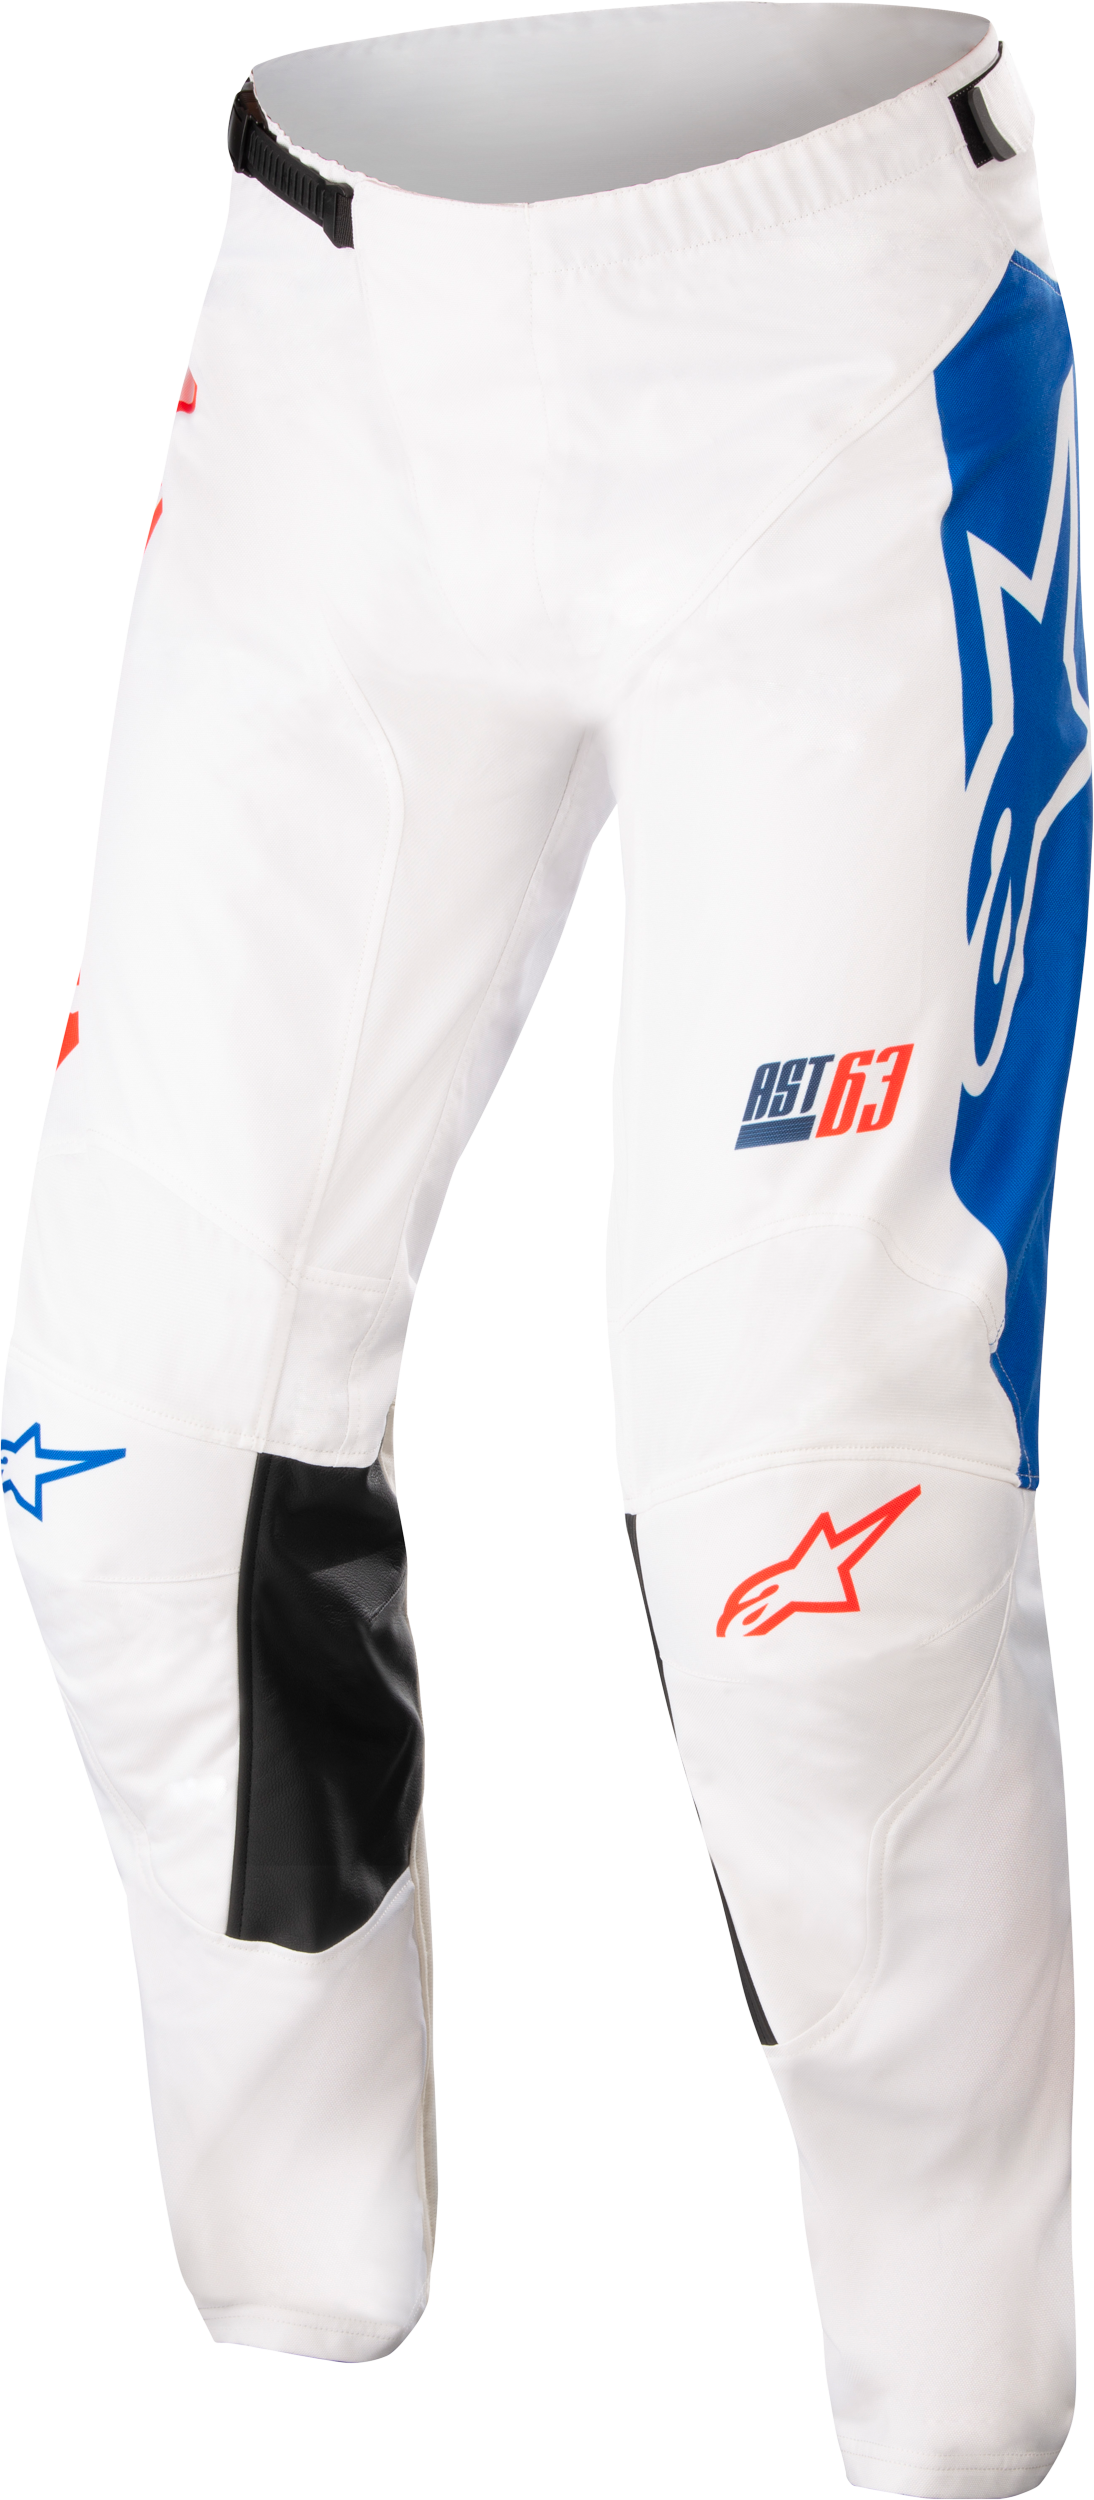 RACER COMPASS PANTS OFF WHITE/RED FLUO/BLUE